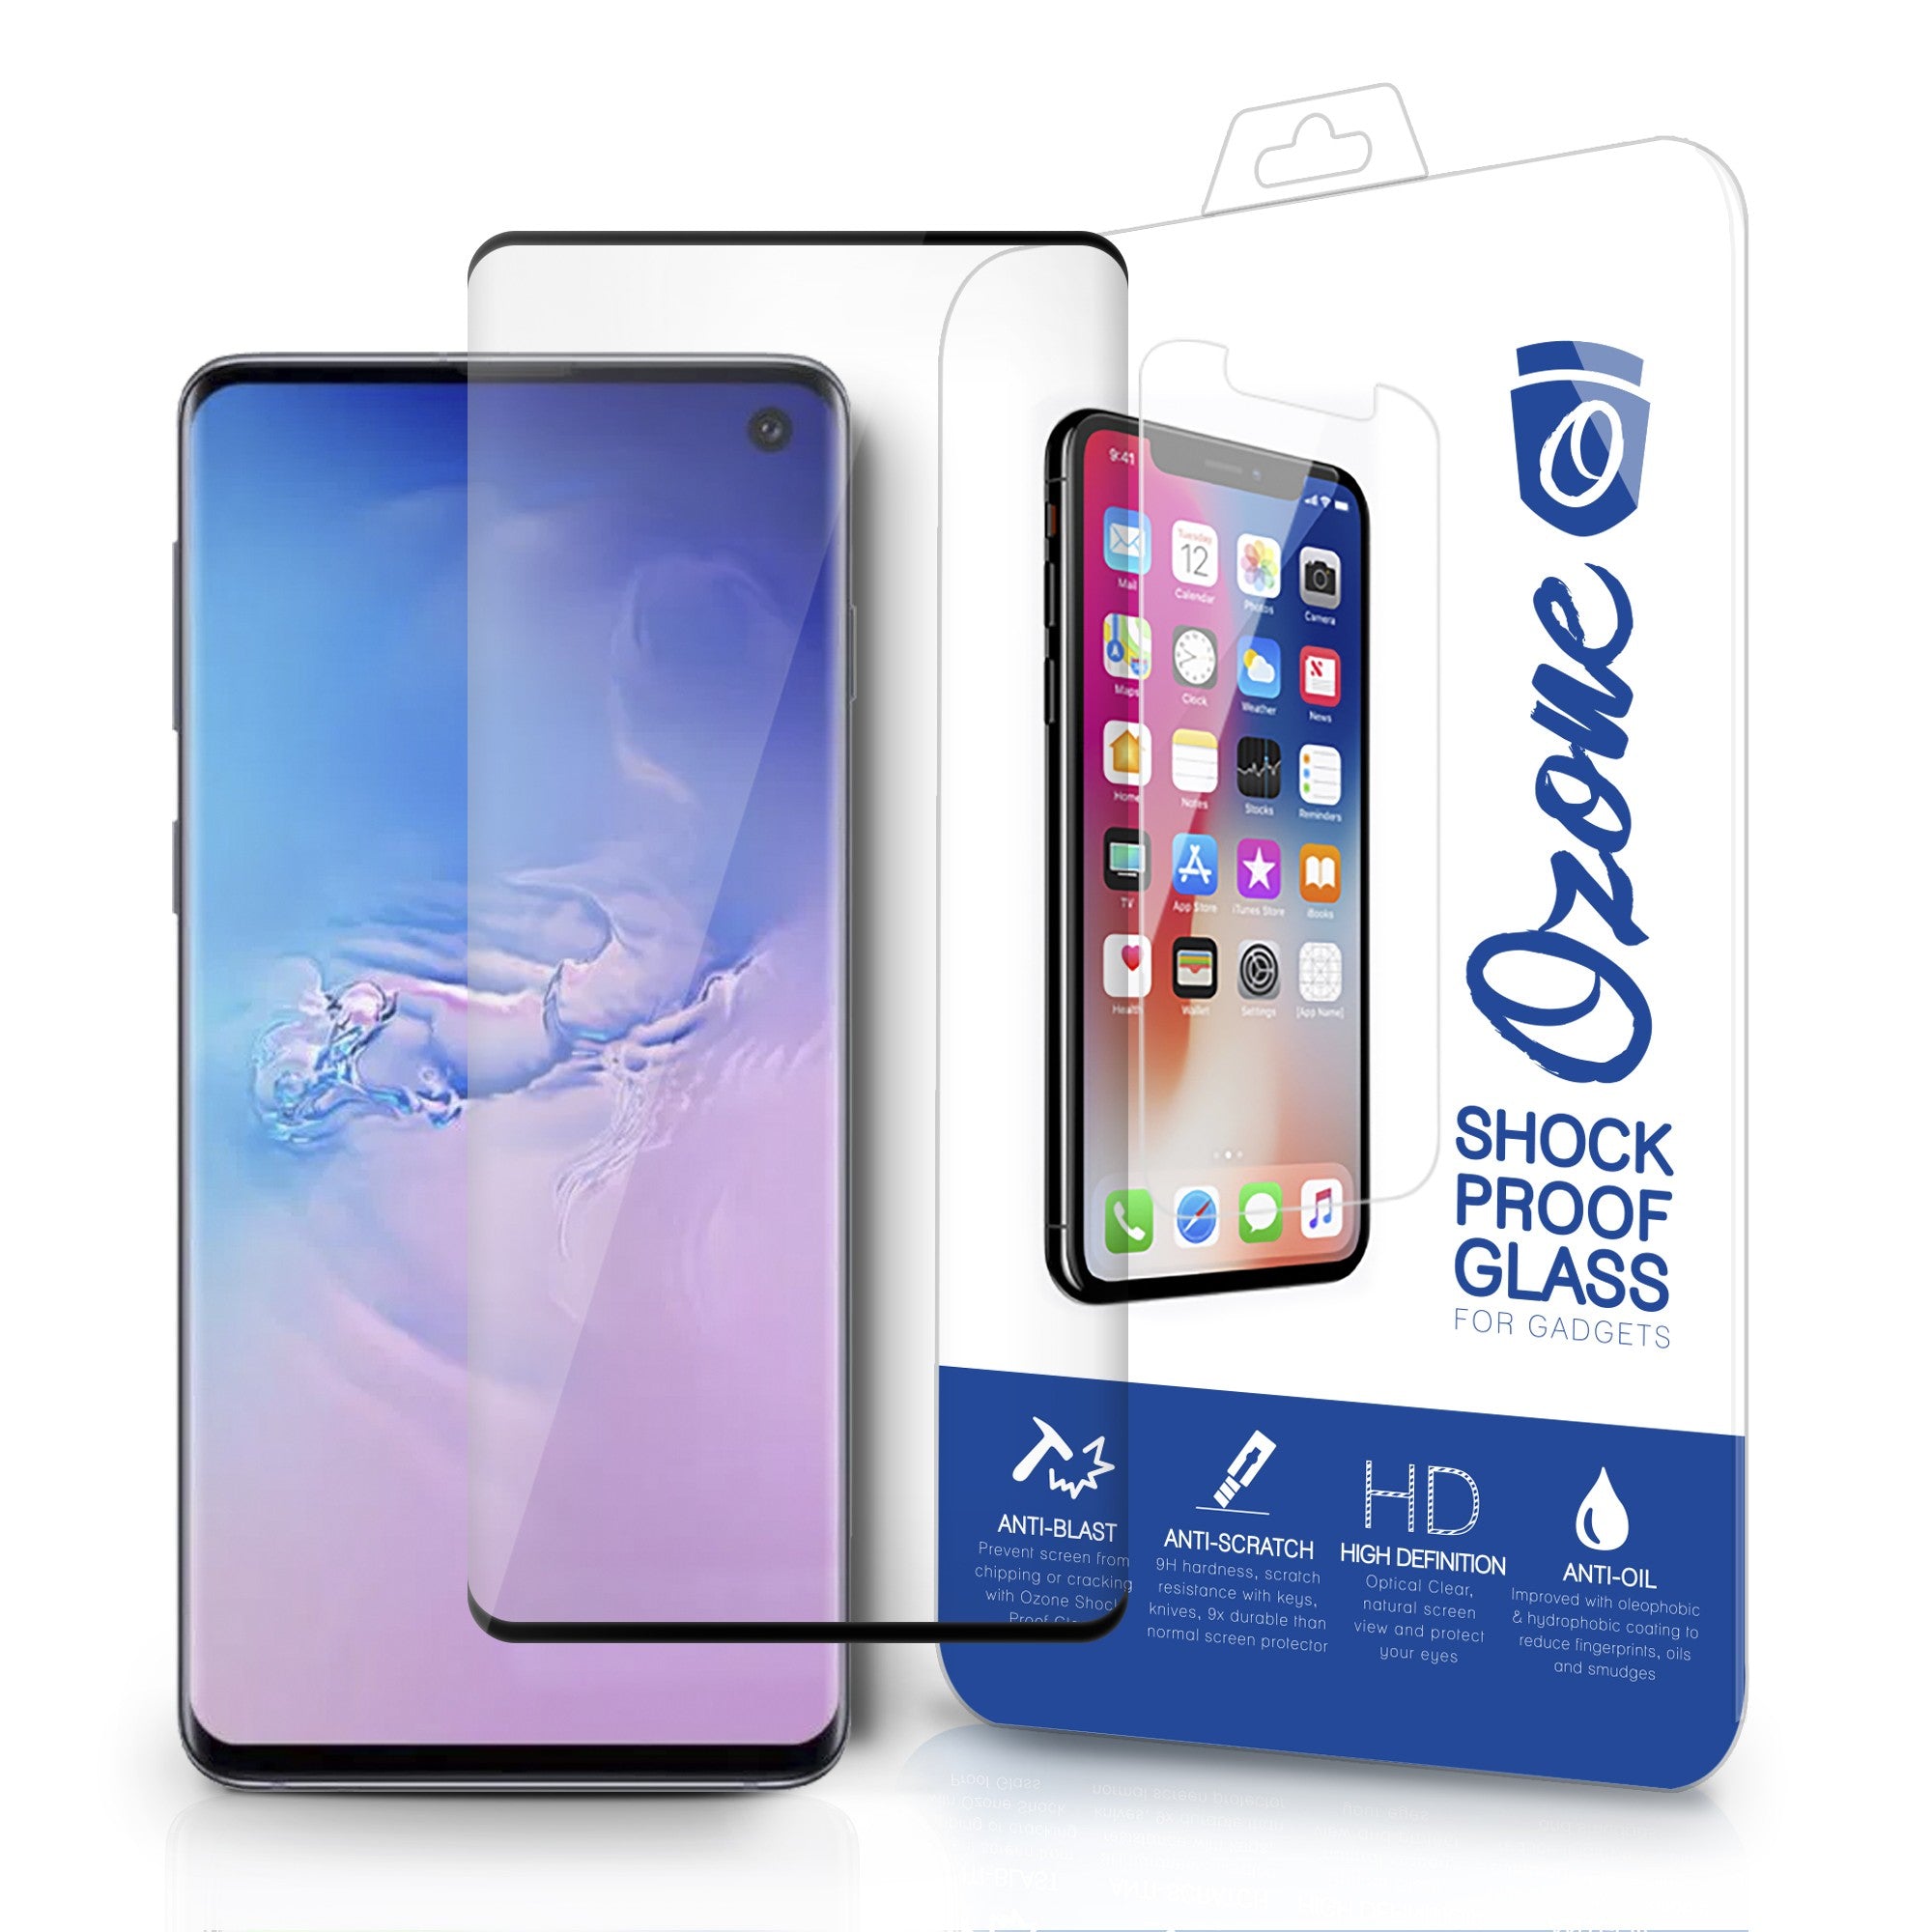 Ozone Samsung Galaxy S10 Tempered Glass Protector Shock Proof Case Friendly Screen Protector - Black